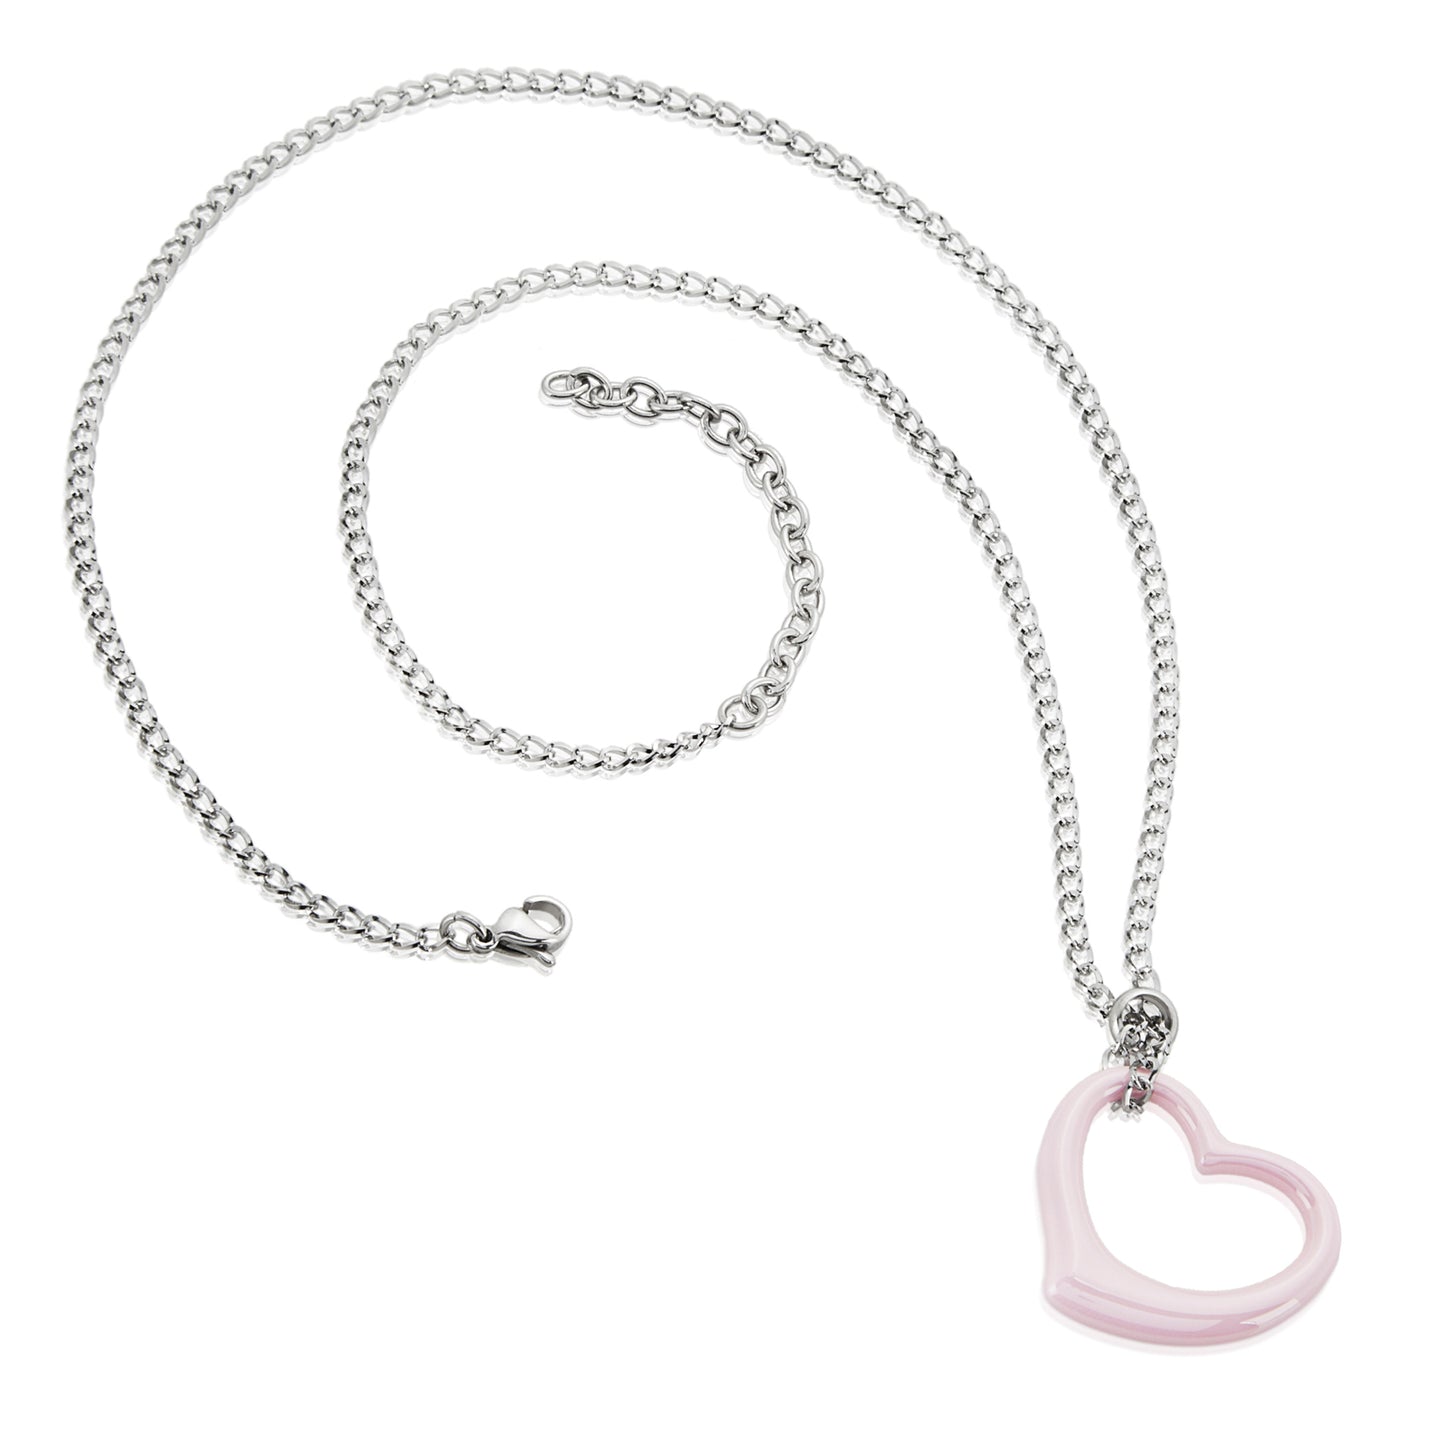 ELYA Women's Ceramic Heart Stainless Steel Curb Chain Pendant Necklace